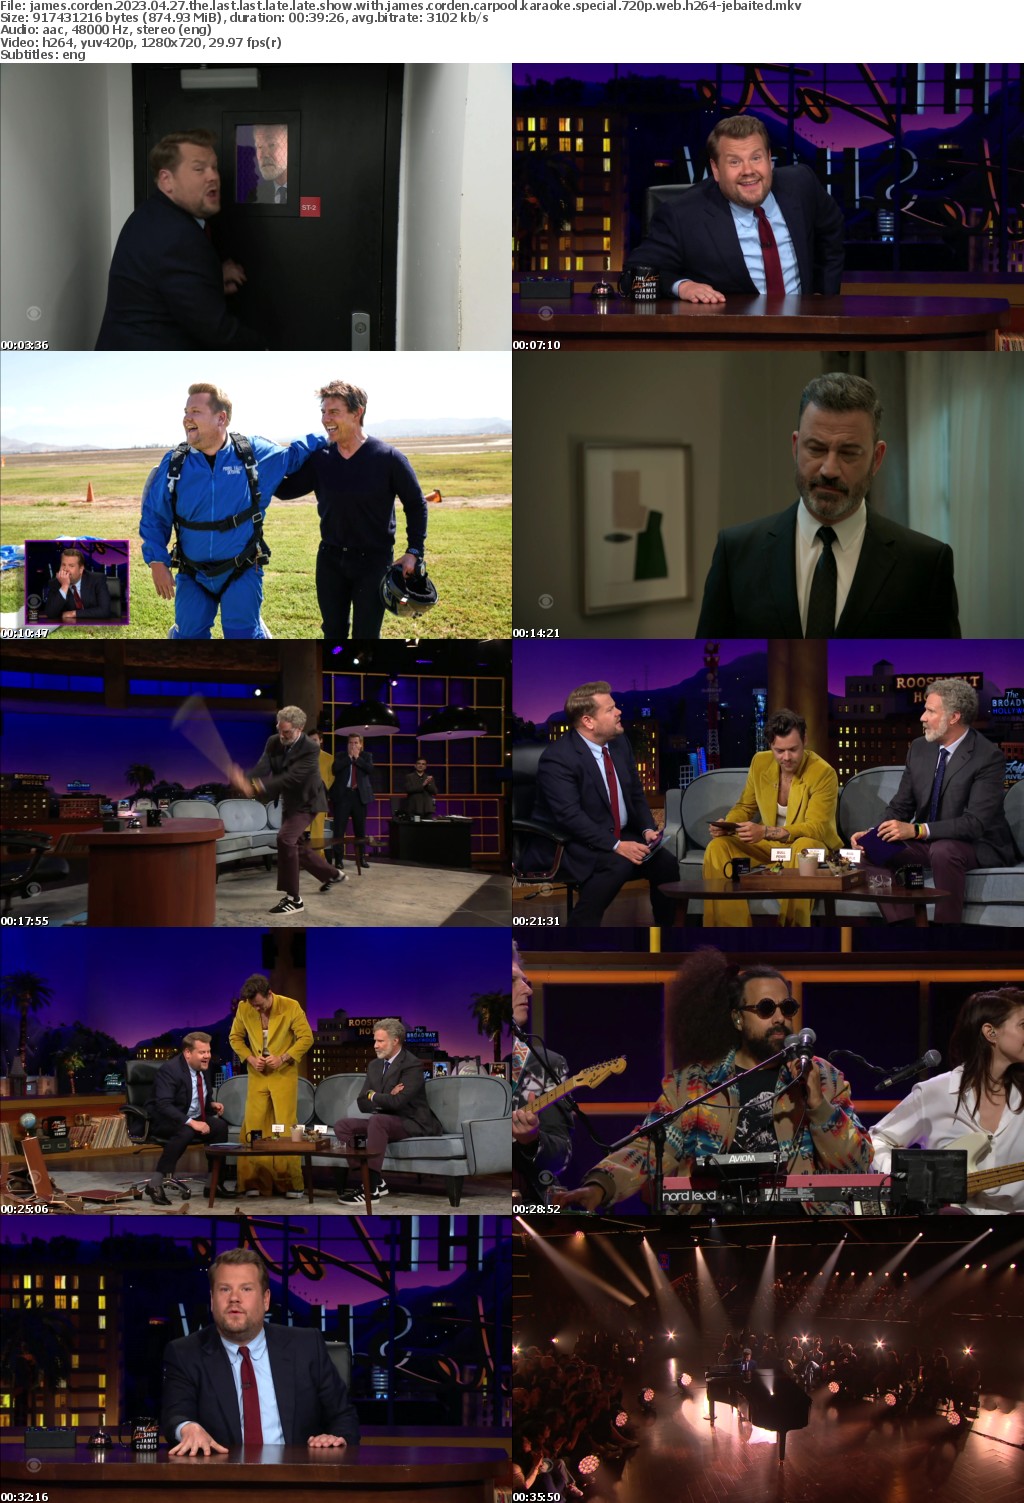 James Corden 2023 04 27 The Last Last Late Late Show With James Corden Carpool Karaoke Special 720p WEB H264-JEBAITED